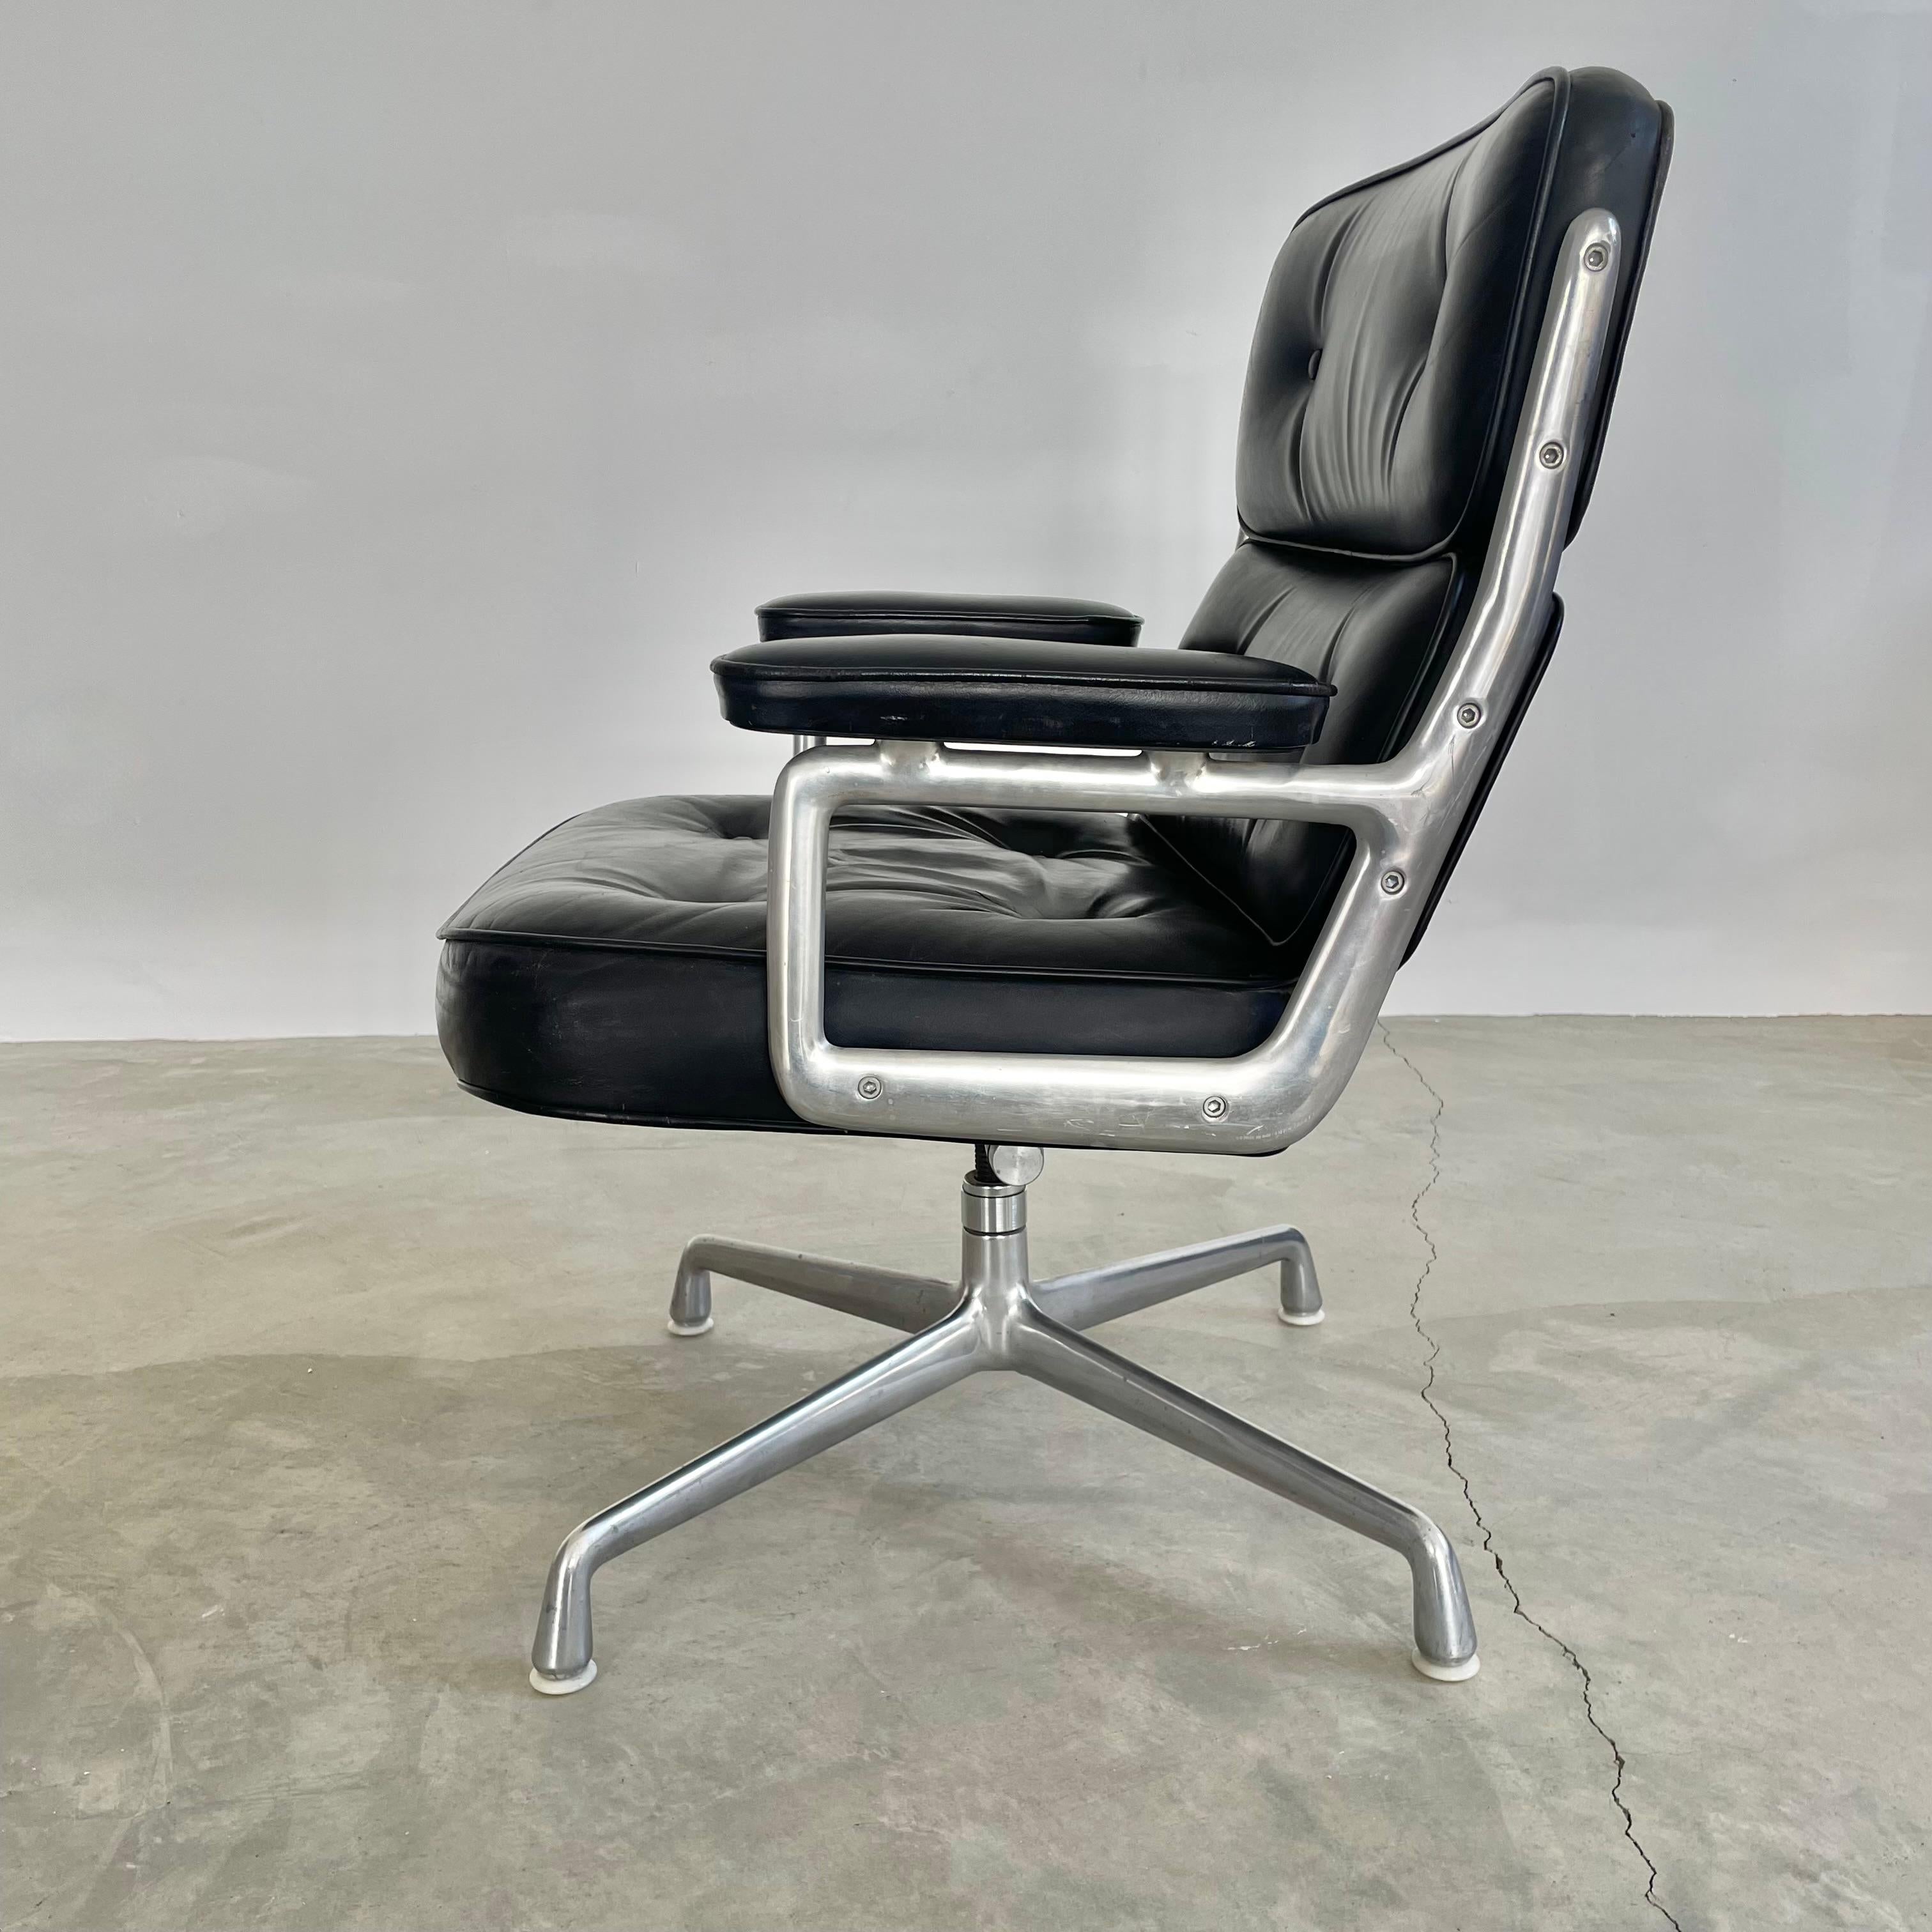 Classic Eames Time Life swivel chair in black leather for Herman Miller. Original black leather with wear as shown. Extremely comfortable and worn in. Chair swivels. Chair reclines. Height is adjustable. Original Herman Miller tag underneath.